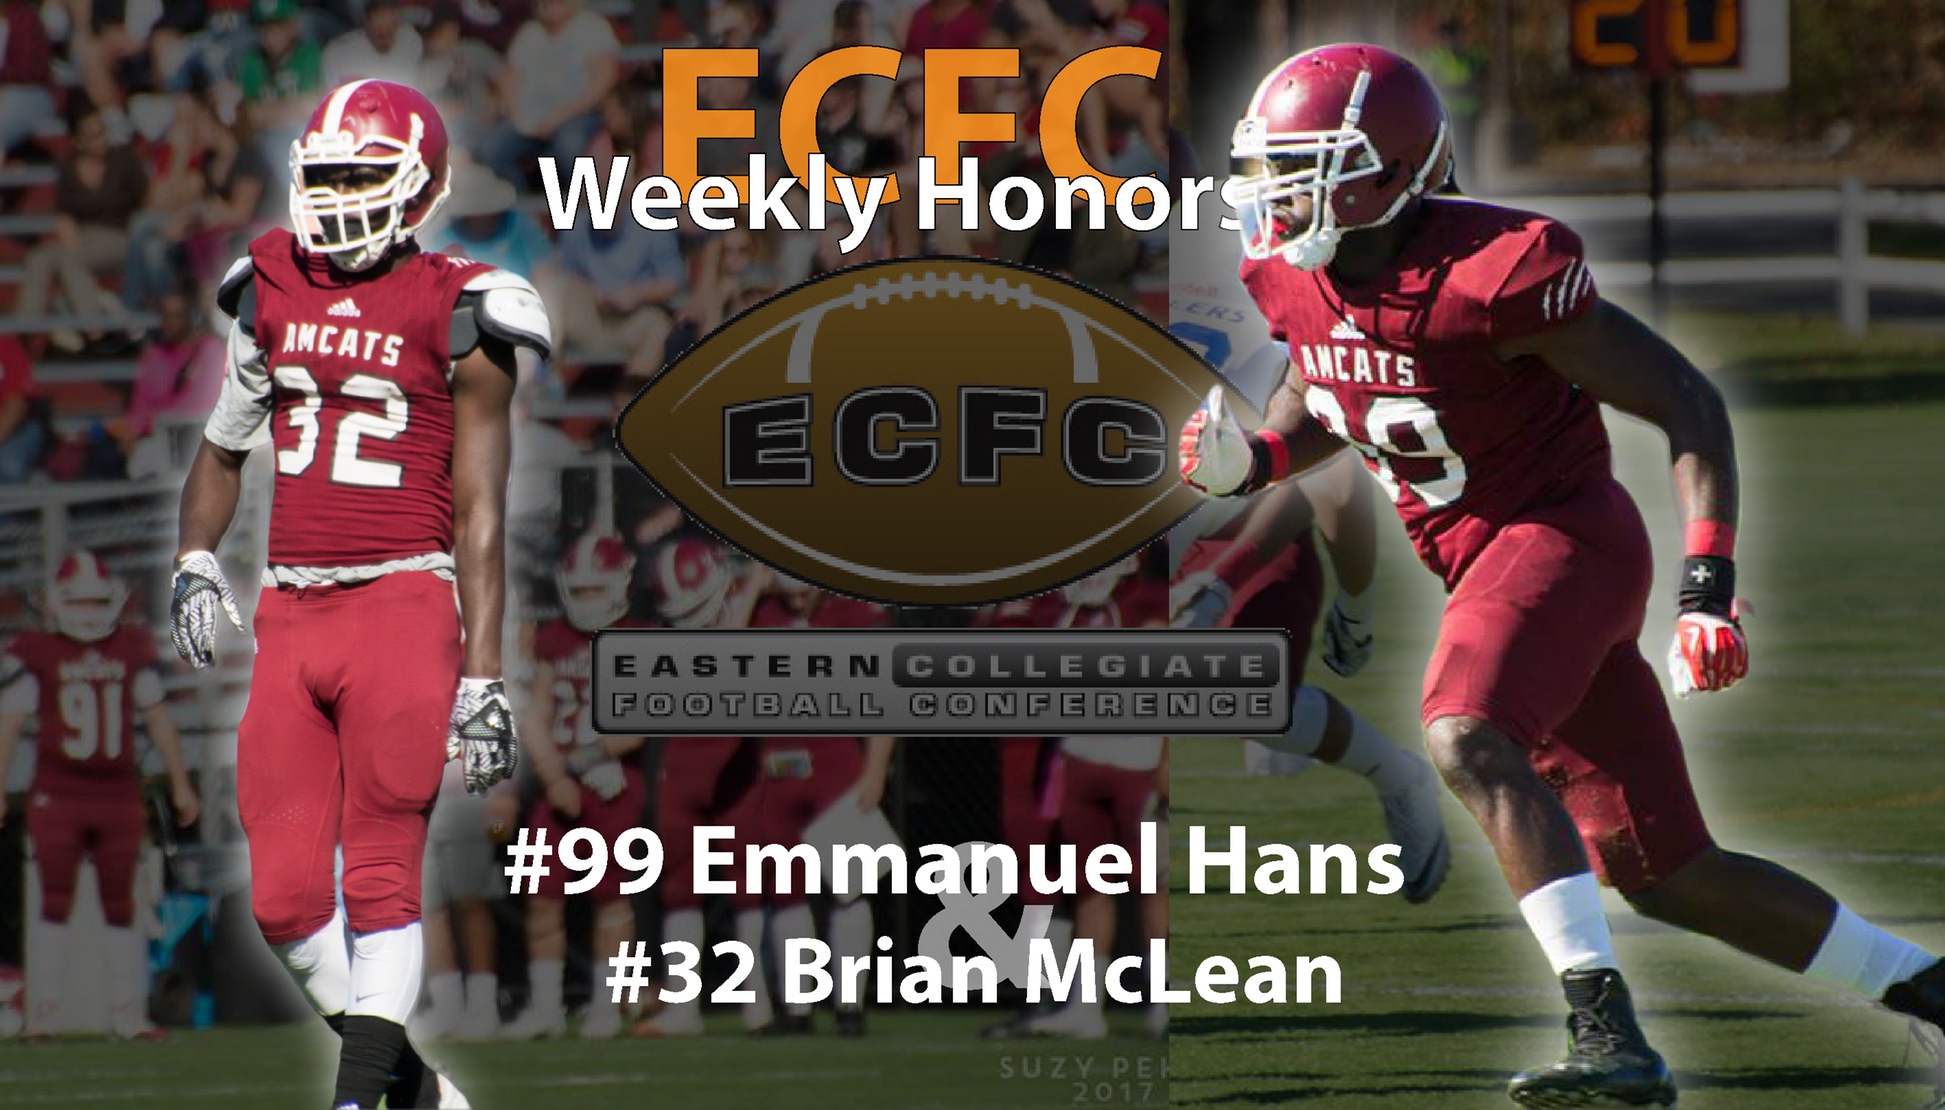 Anna Maria Football players receive ECFC Weekly Honors